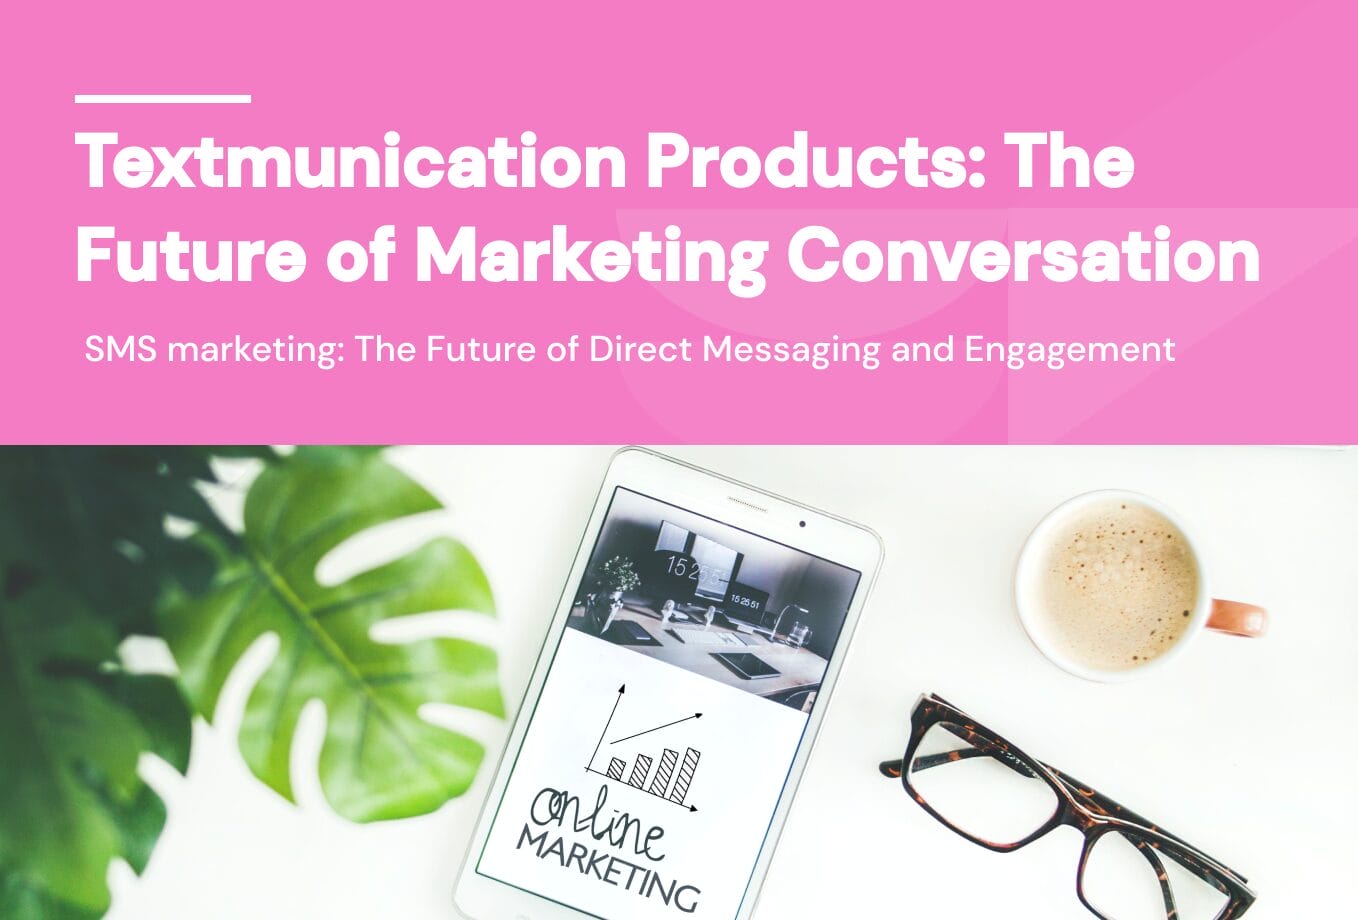 SMS marketing: The Future of Direct Messaging and Engagement